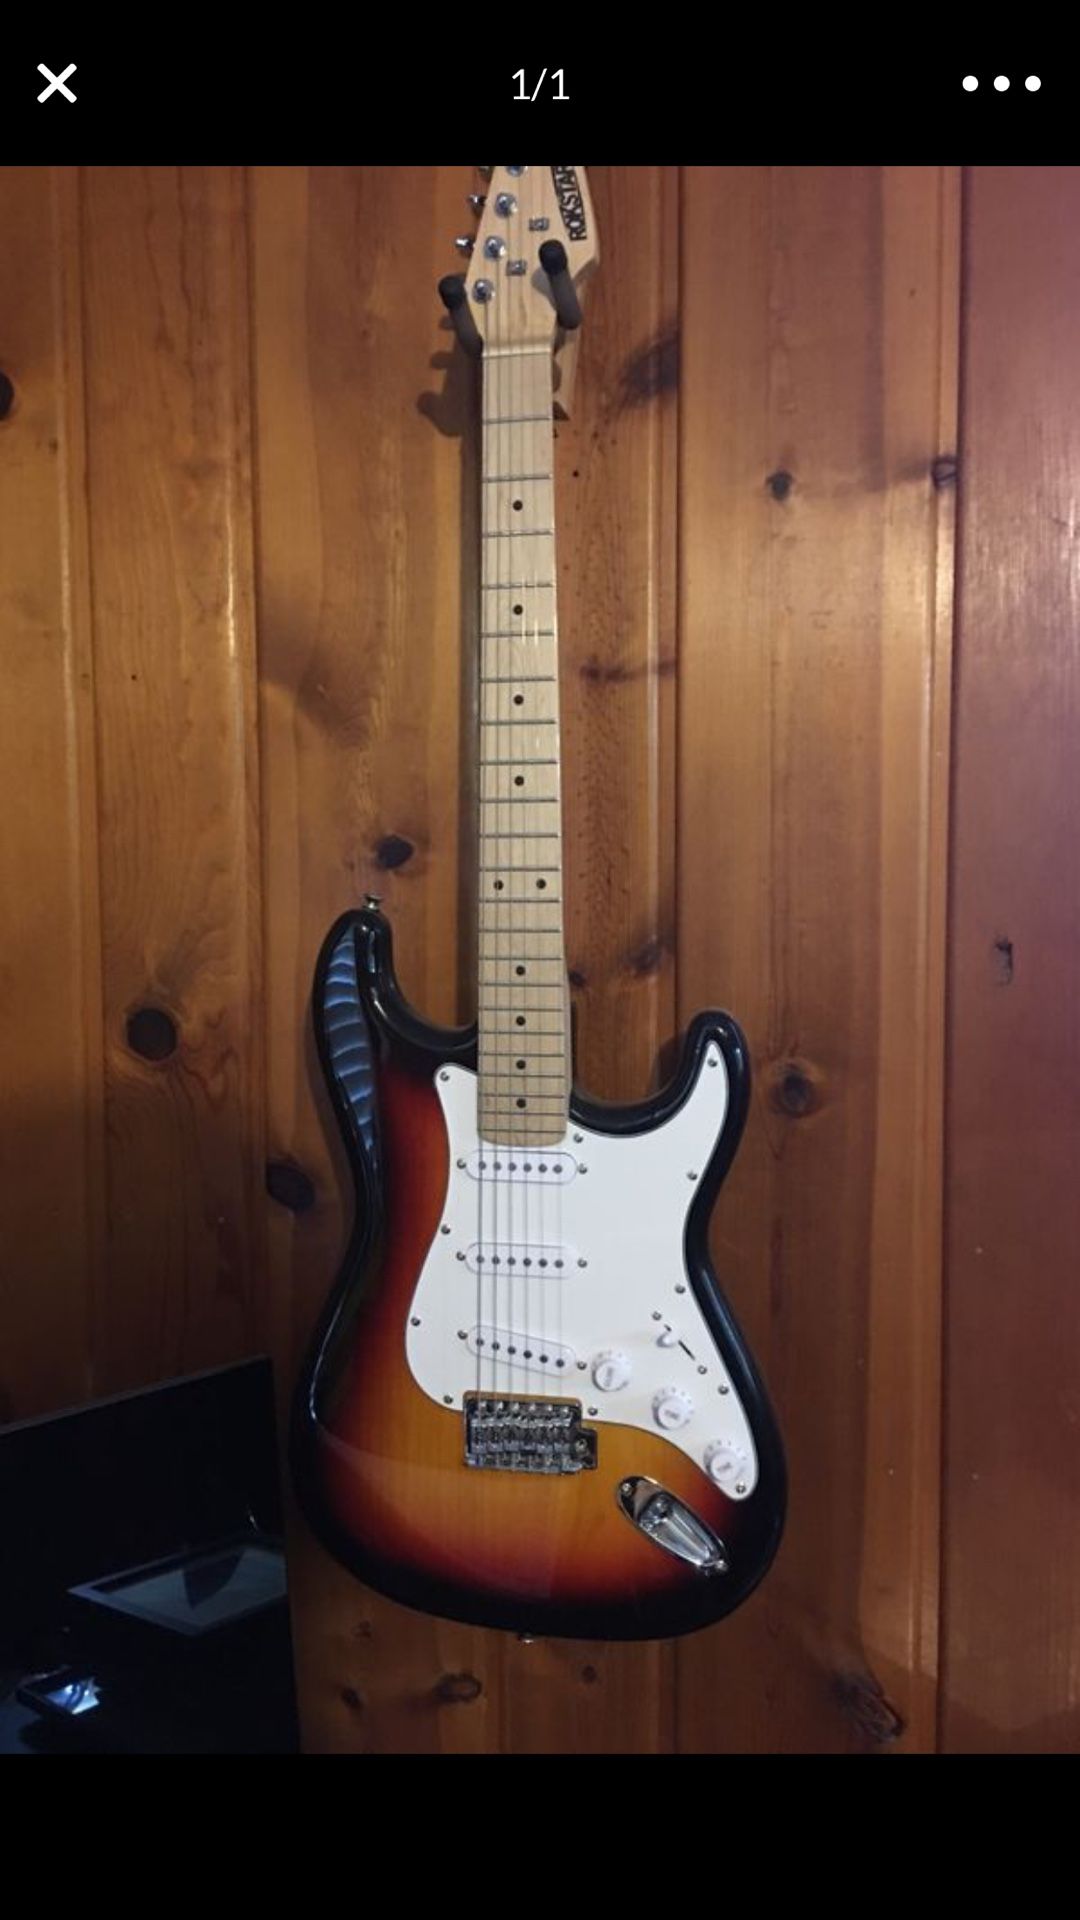 Brand new electric guitar